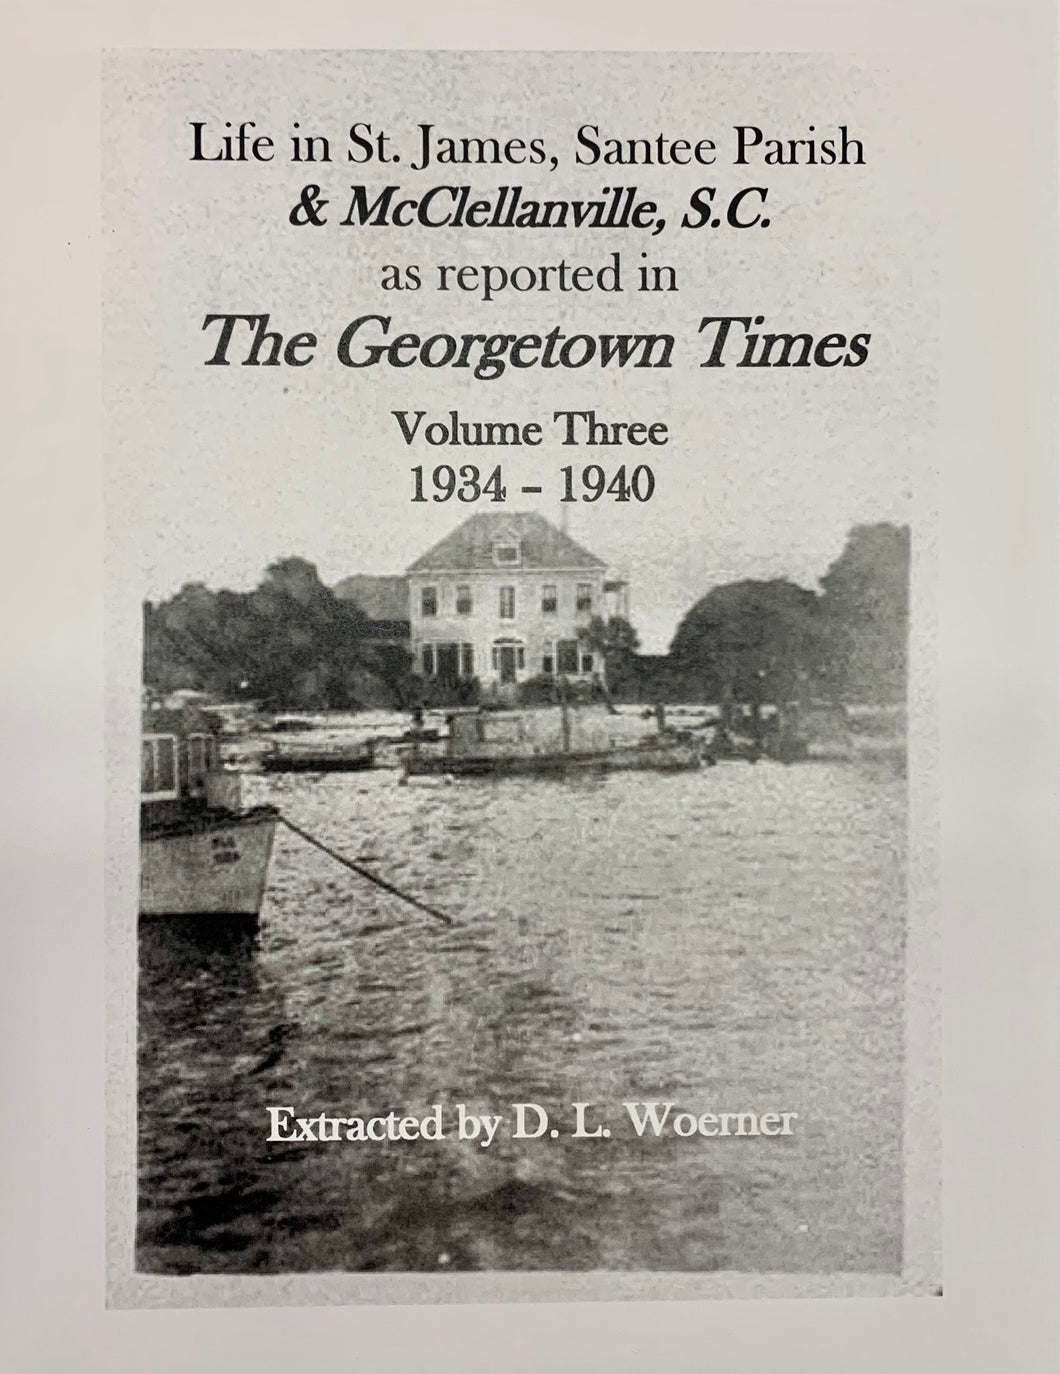 Life in St. James, Santee Parish & McClellanville, SC as reported in The Georgetown Times